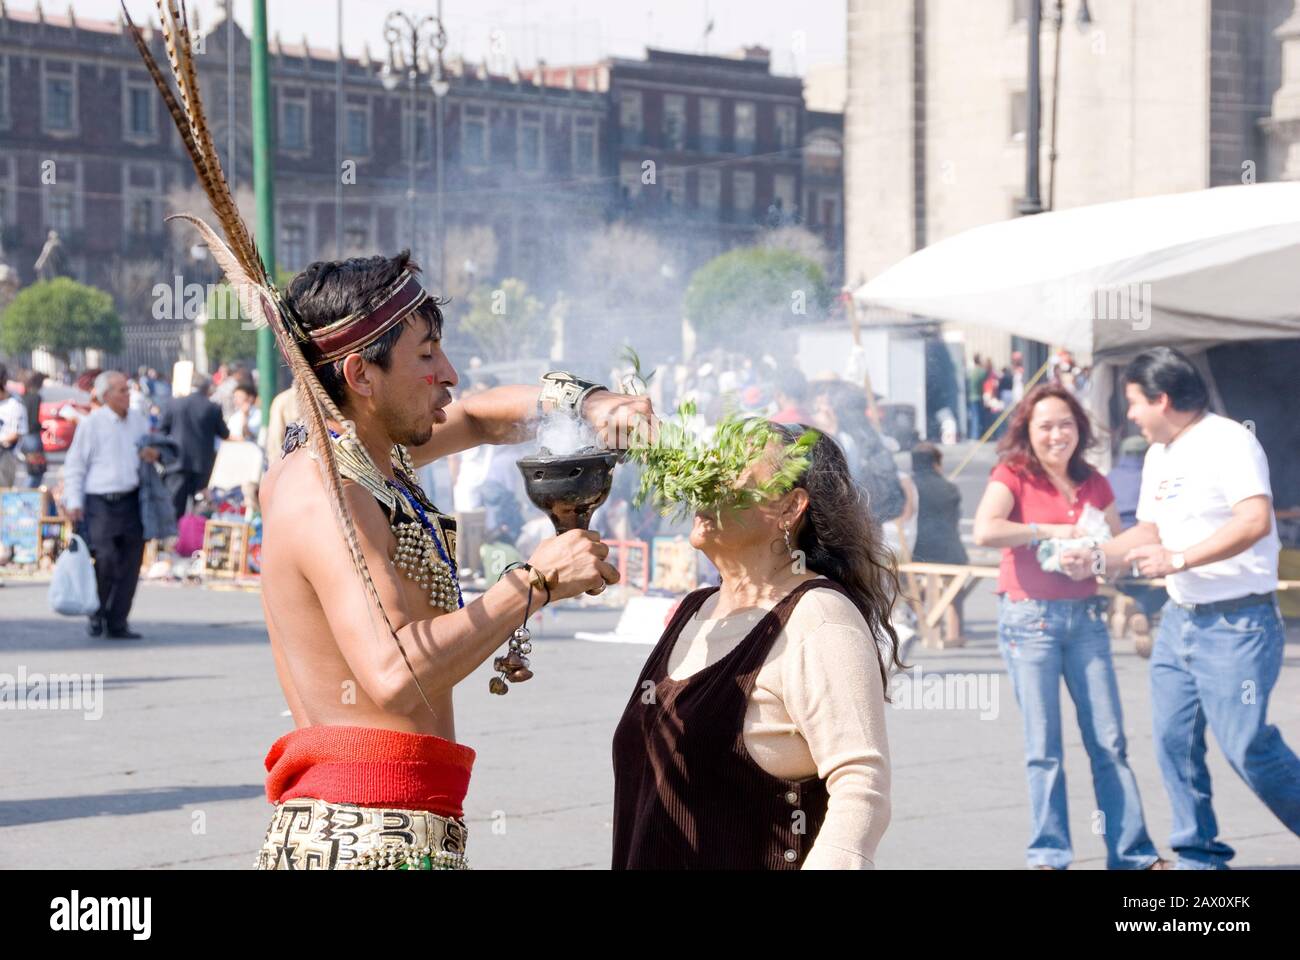 Mexico City - Jan 13, 2007: Aztec Medicine Man using smoke and herbs to cleanse the aura of an elderly indigenous woman on 13 Jan in Zocalo,  Mexico C Stock Photo